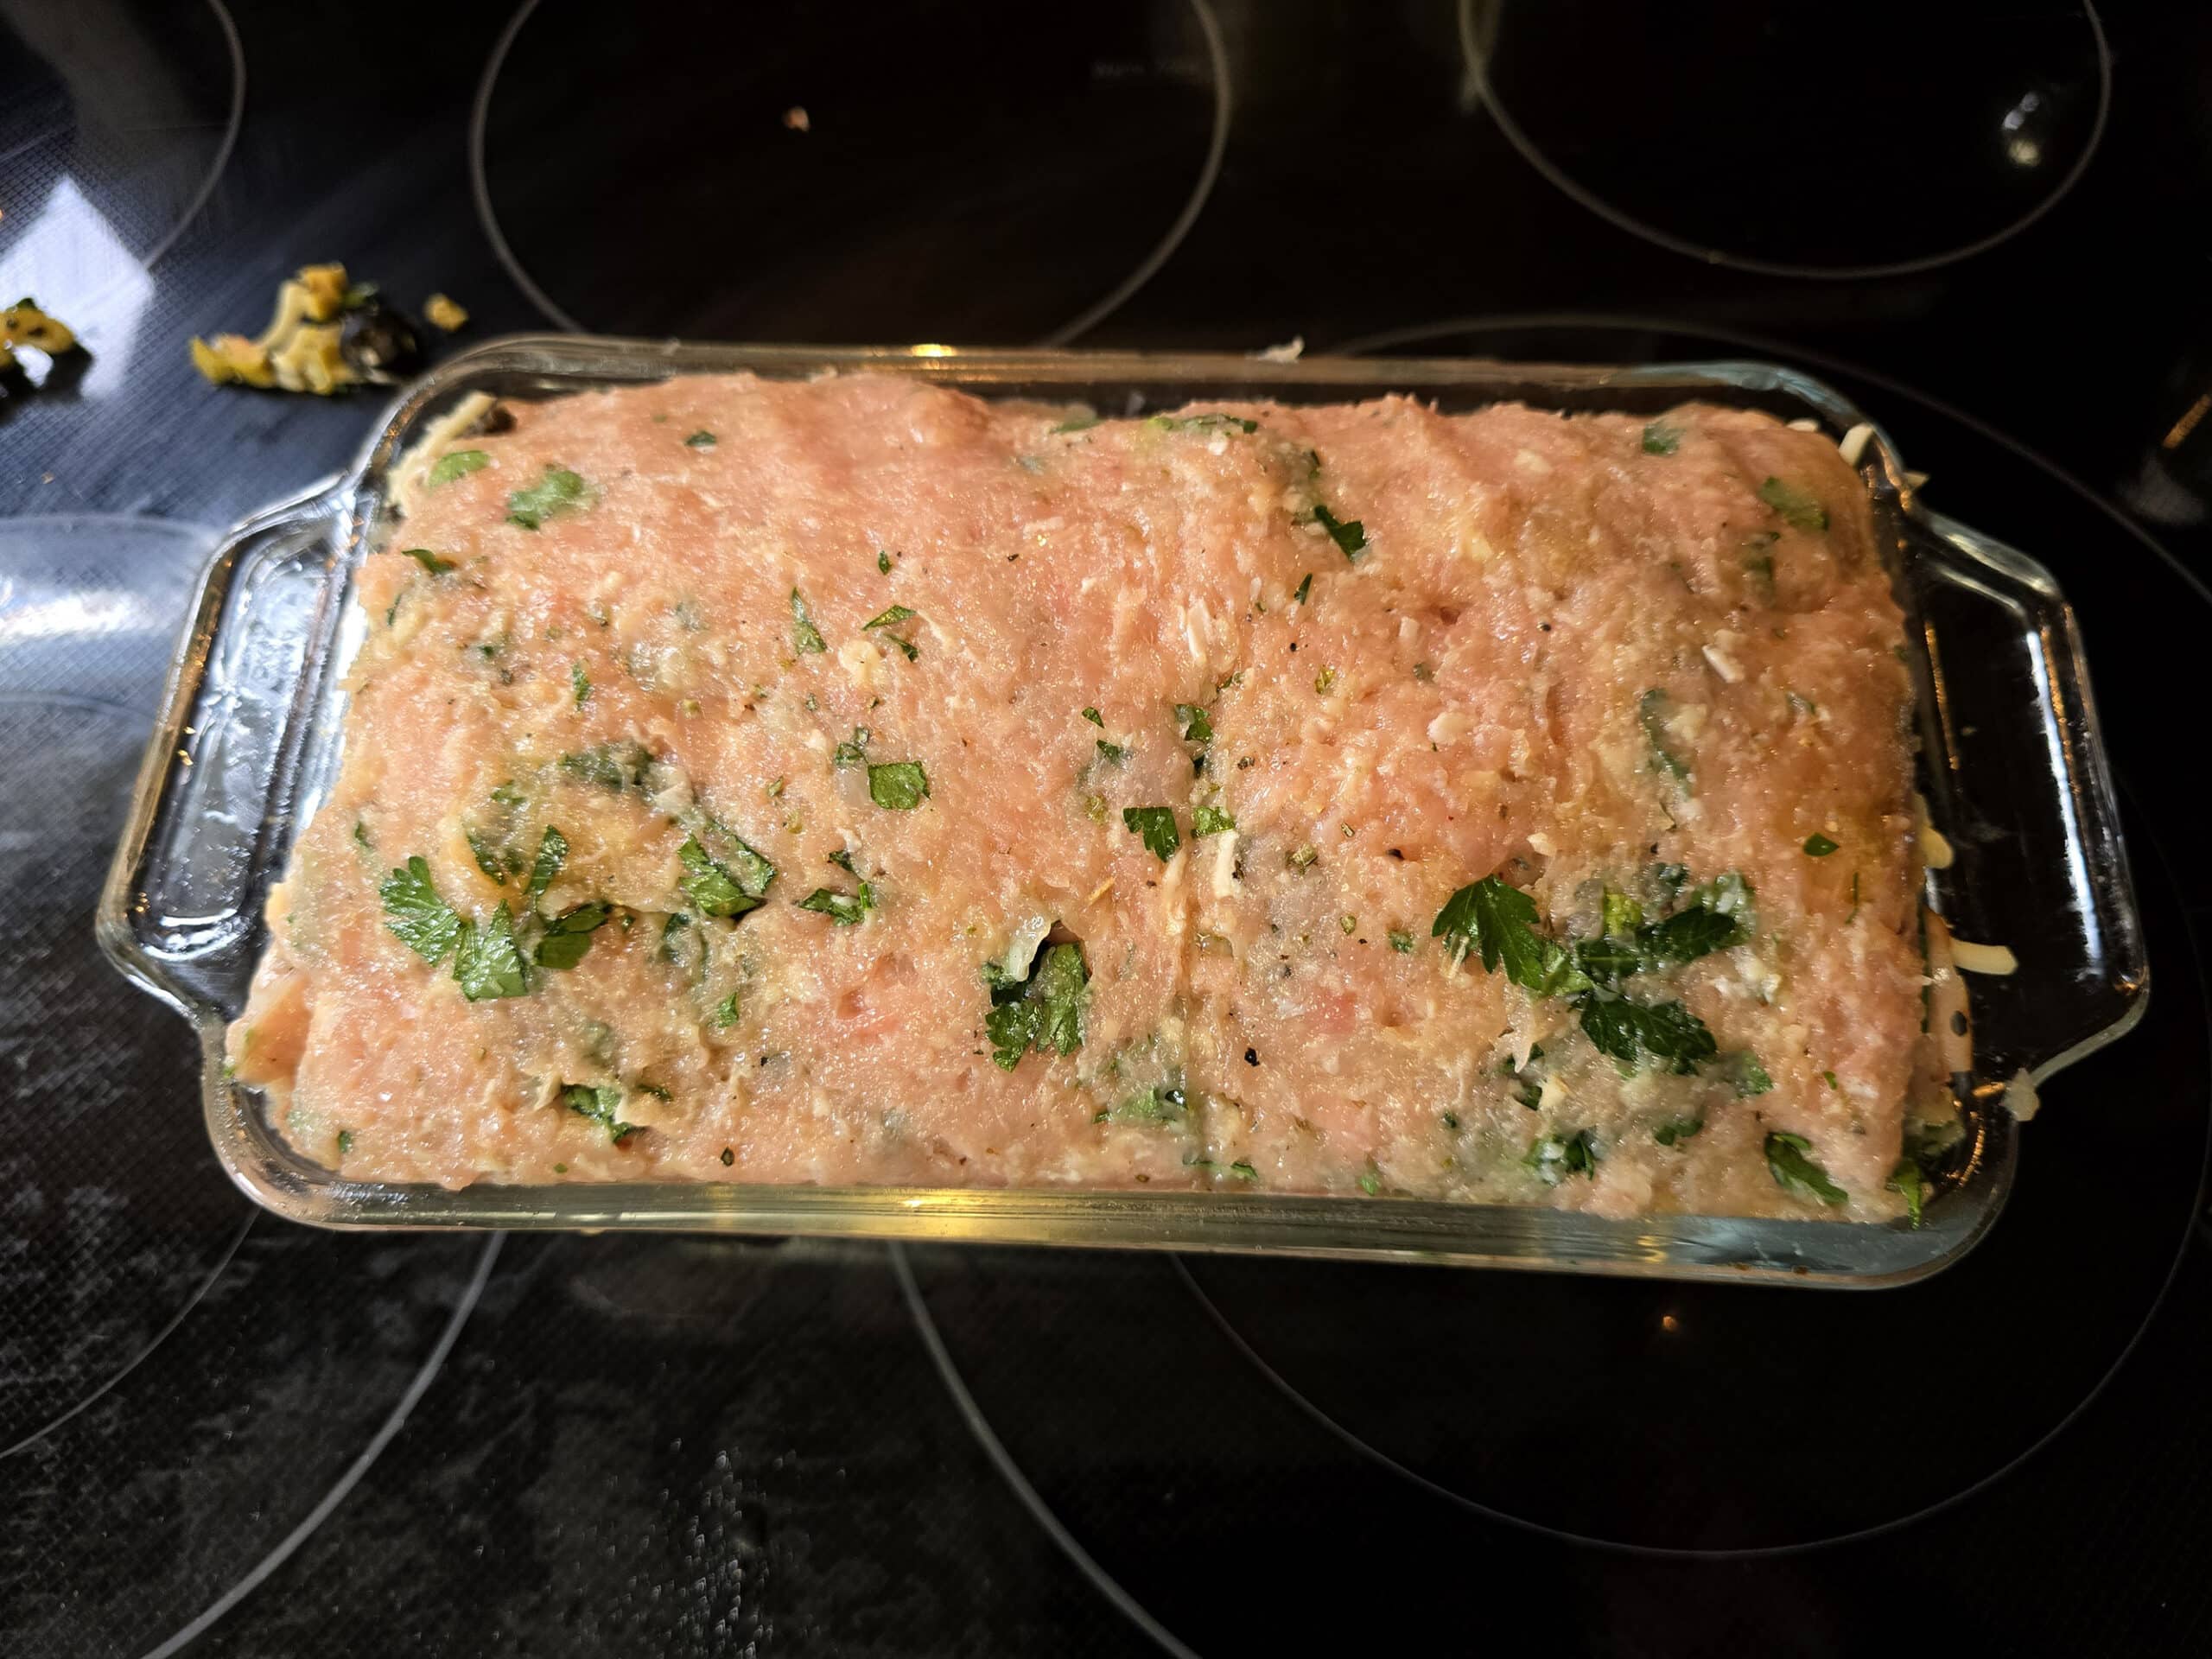 The muffaletta meatloaf in a loaf pan.